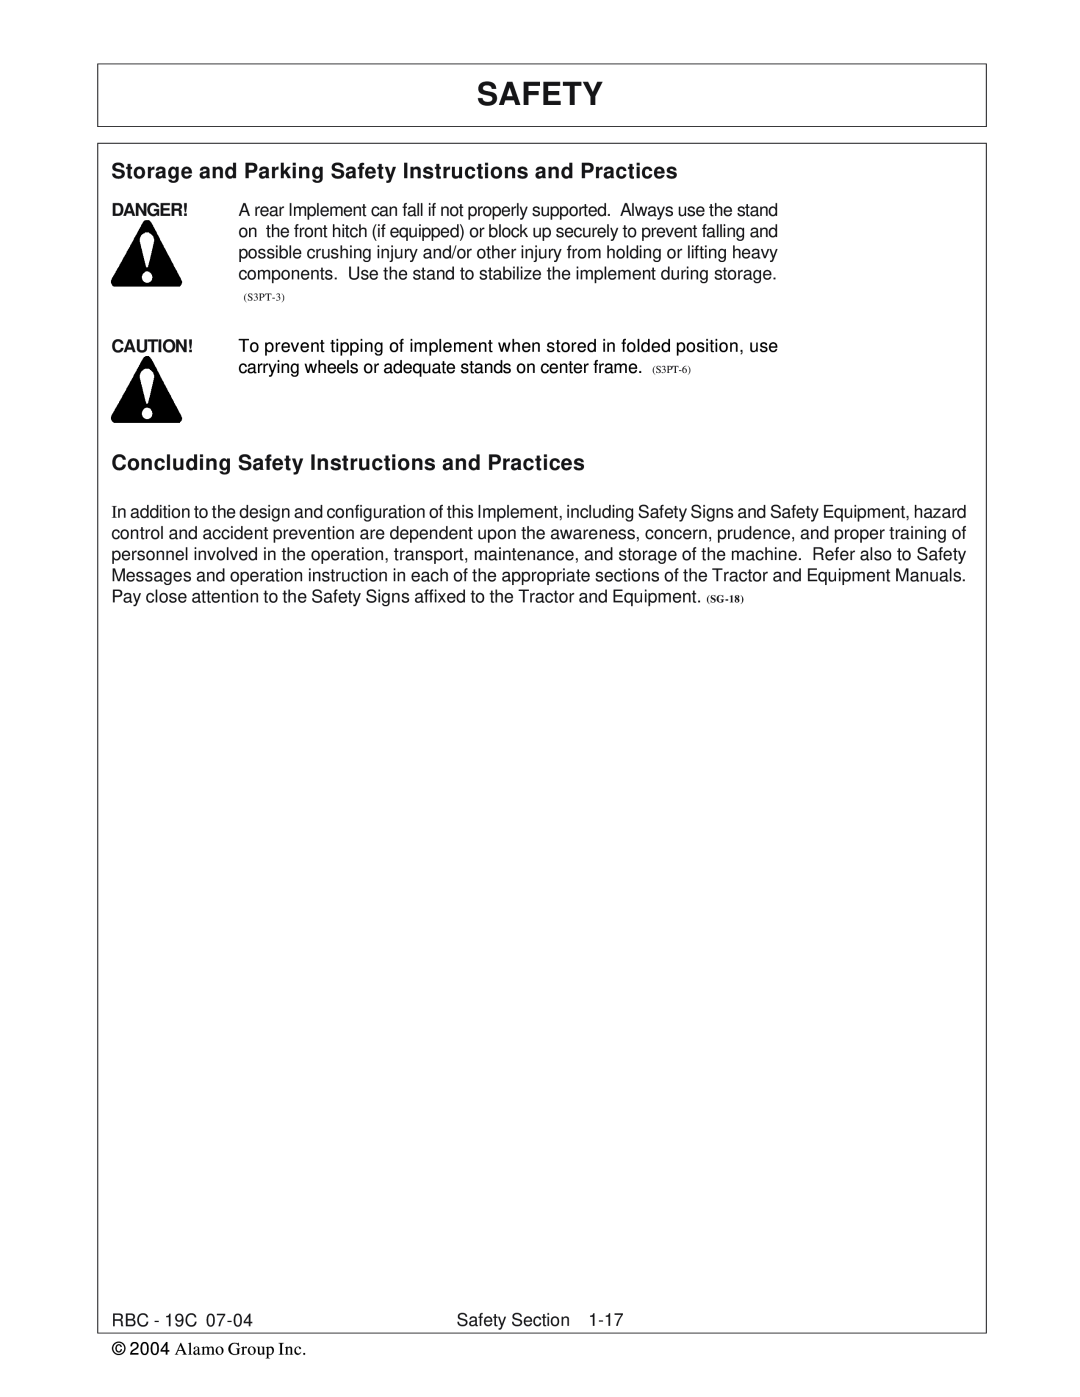 Tiger RBF-19C manual Concluding Safety Instructions and Practices 